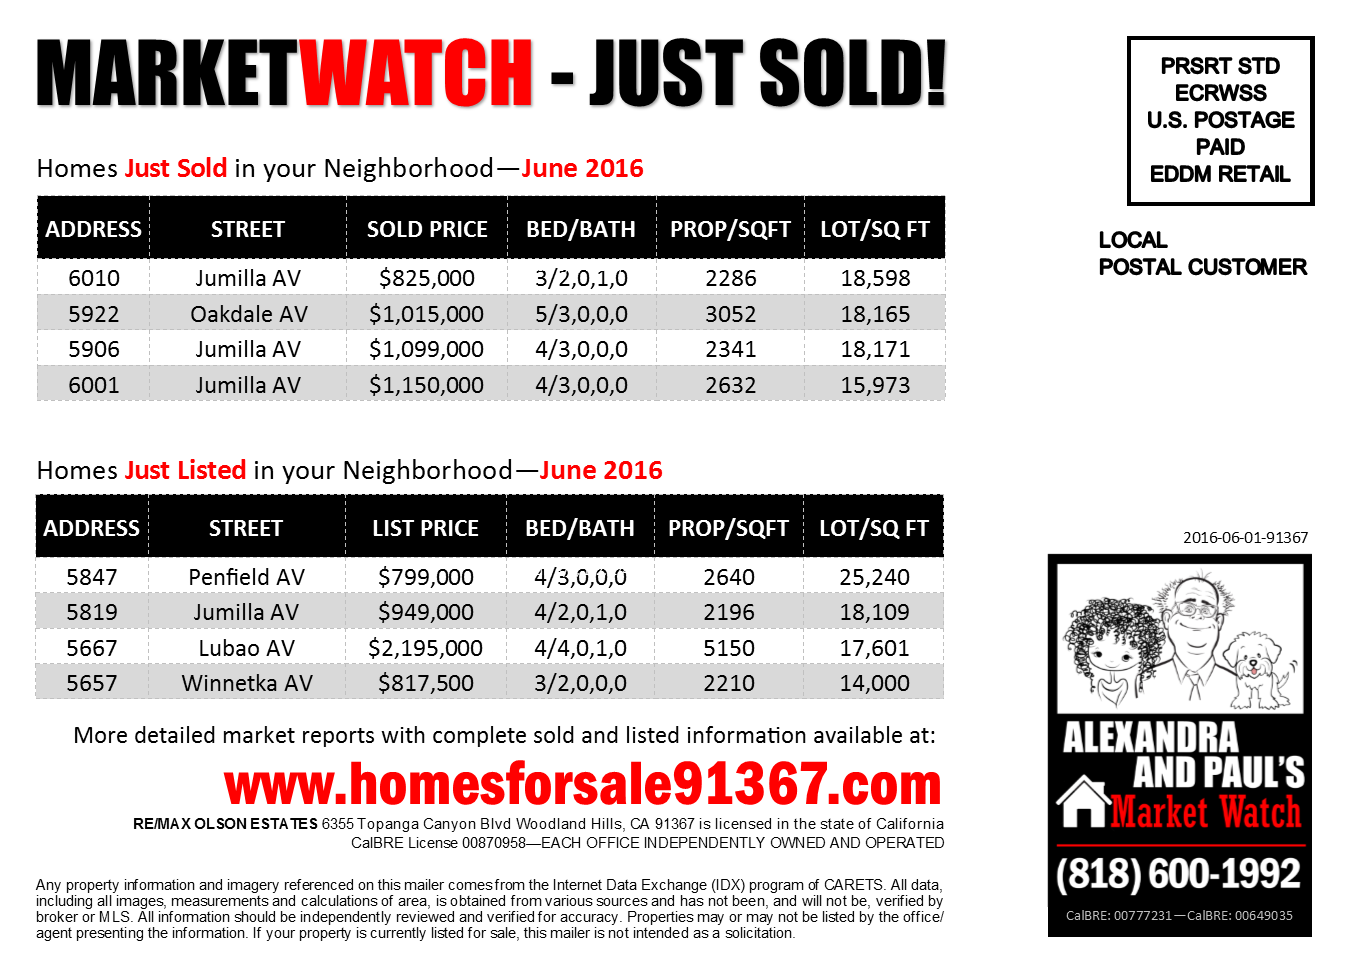 Remax-at-Home - Collateral - MARKET WATCH - JUN2016-1 - BACK (Rev-1)